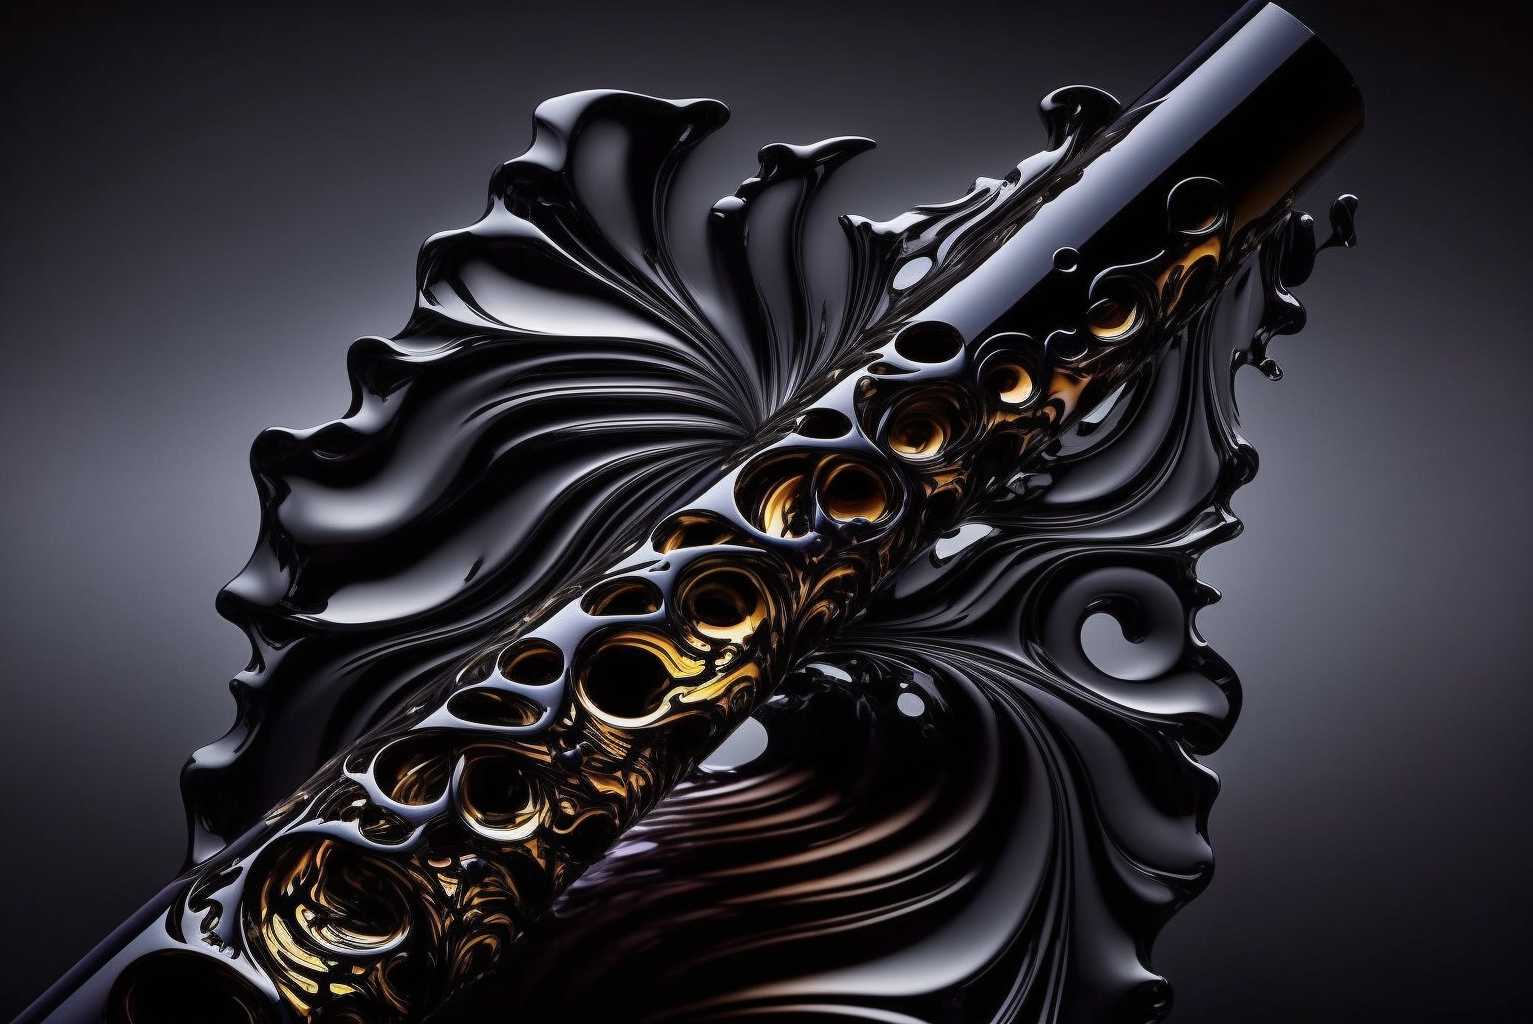 The Black Lacquered Flute